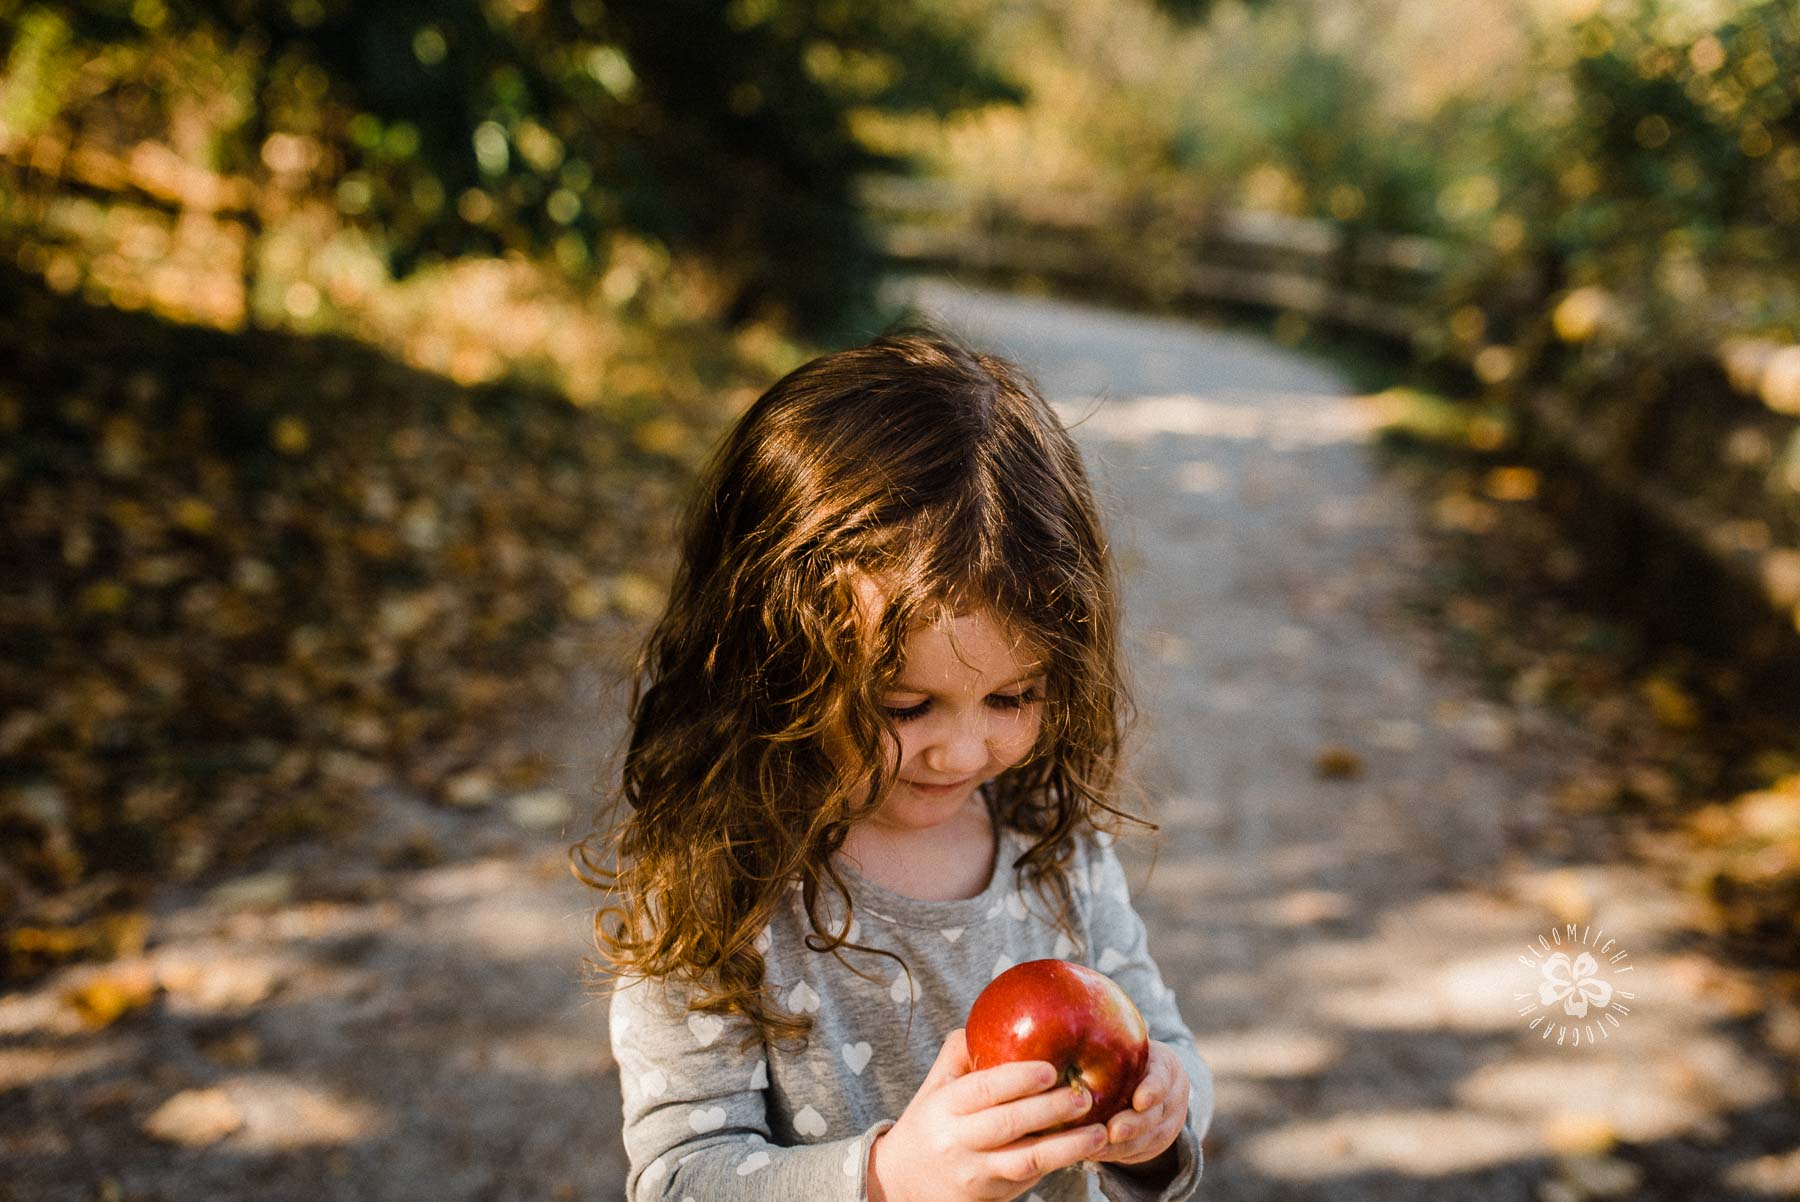 Sweet little girl looking at her apple in her hand while standing in a beautiful trail of Fall season